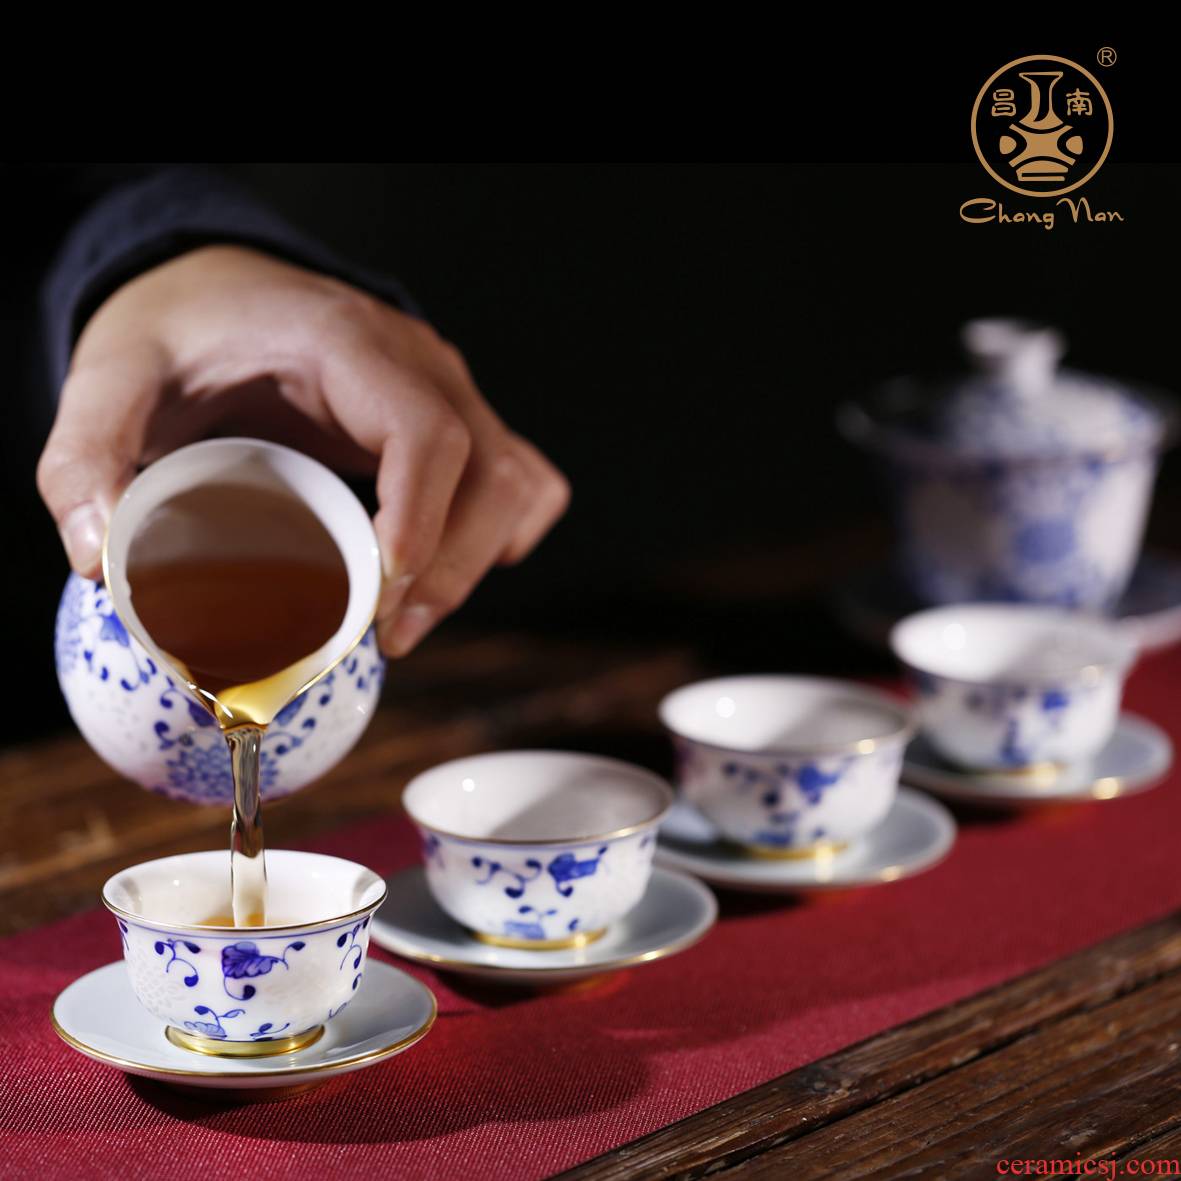 Chang south jingdezhen China to send the meeting set of tea set manual hollow out porcelain gifts, household tea set gift boxes